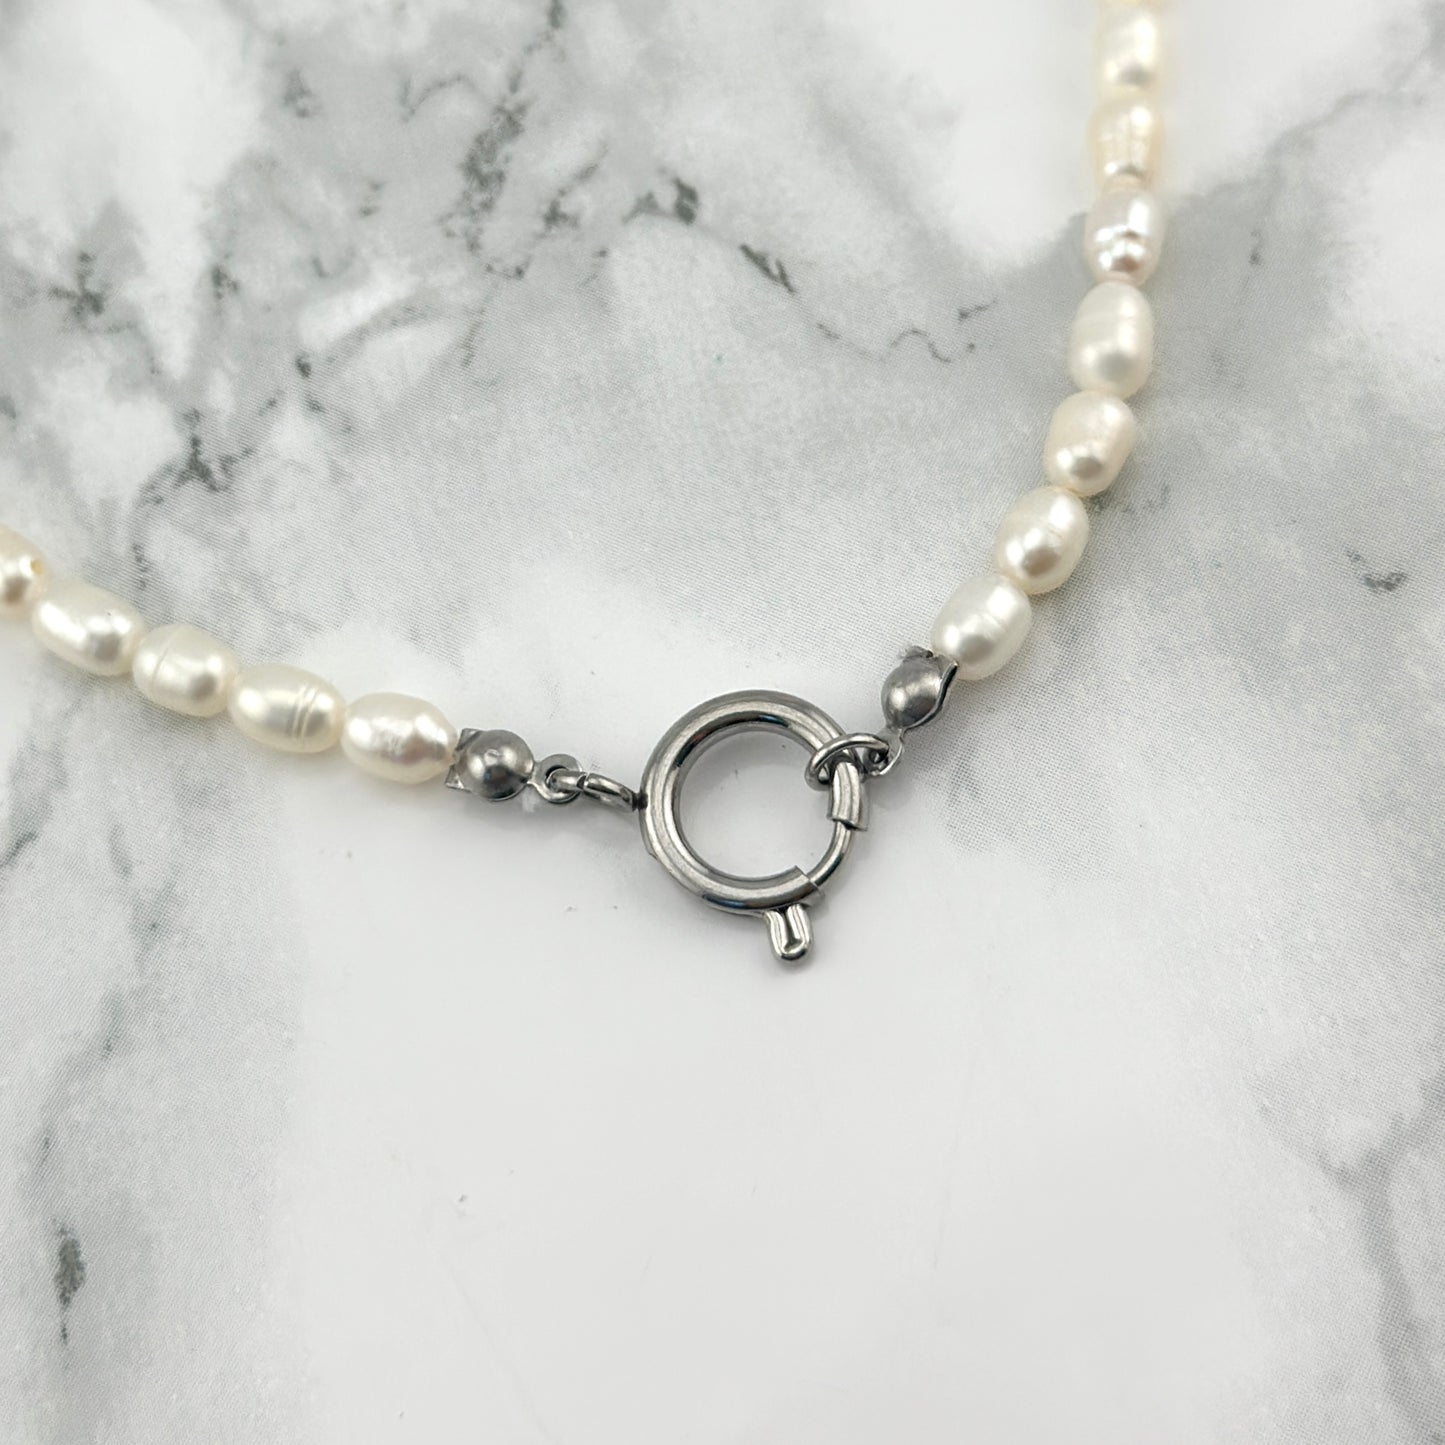 Pearl necklace with a silver clasp